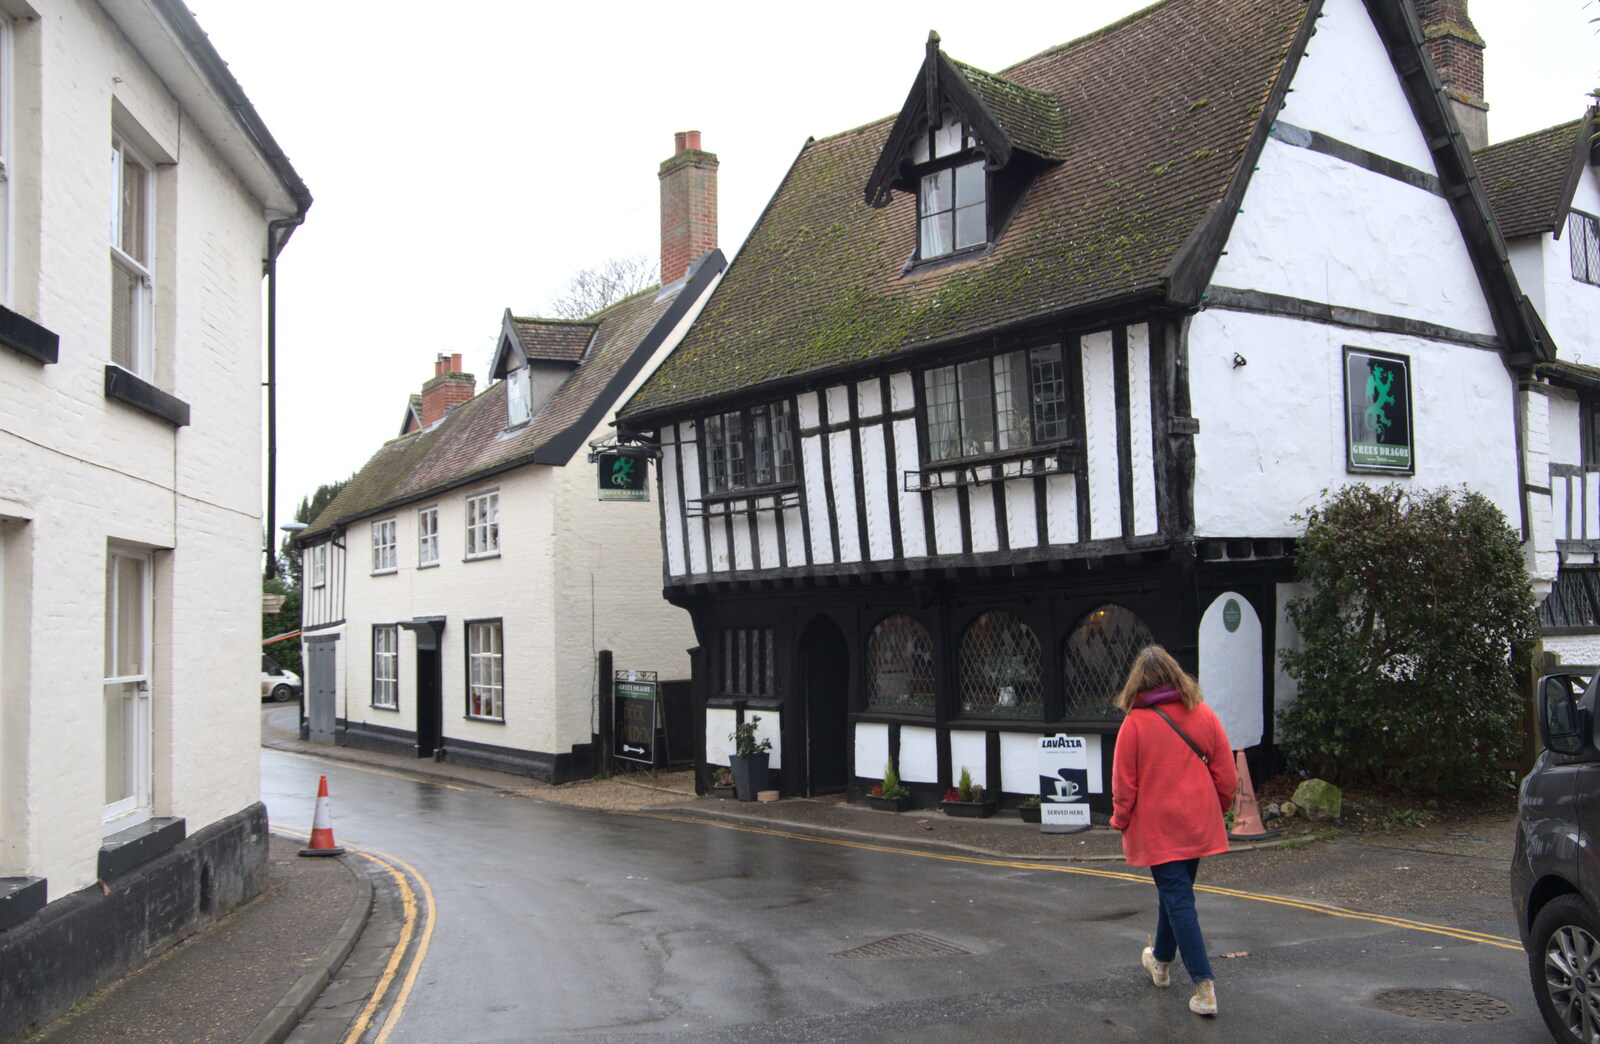 Isobel heads into the Green Dragon pub from A Postcard from Wymondham, Norfolk - 26th January 2023